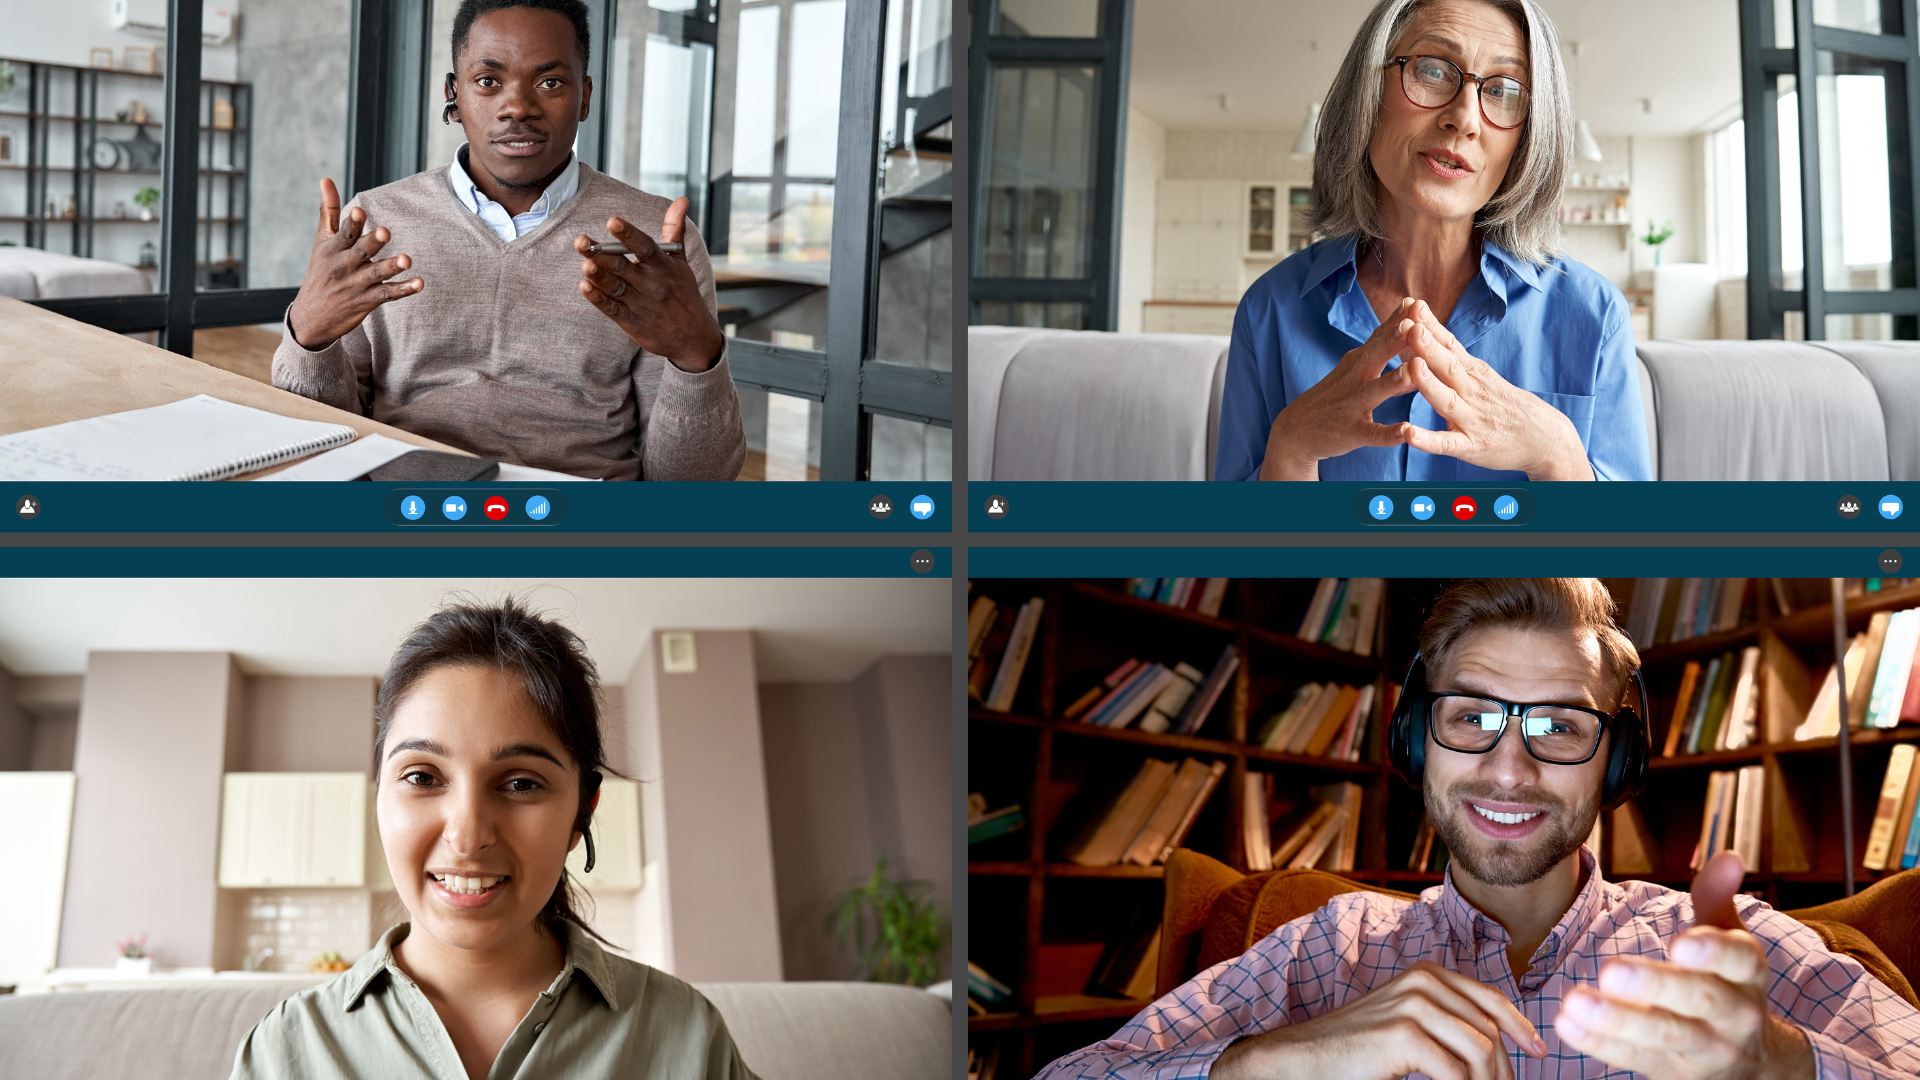 Ways To Improve Remote Collaboration and Communication